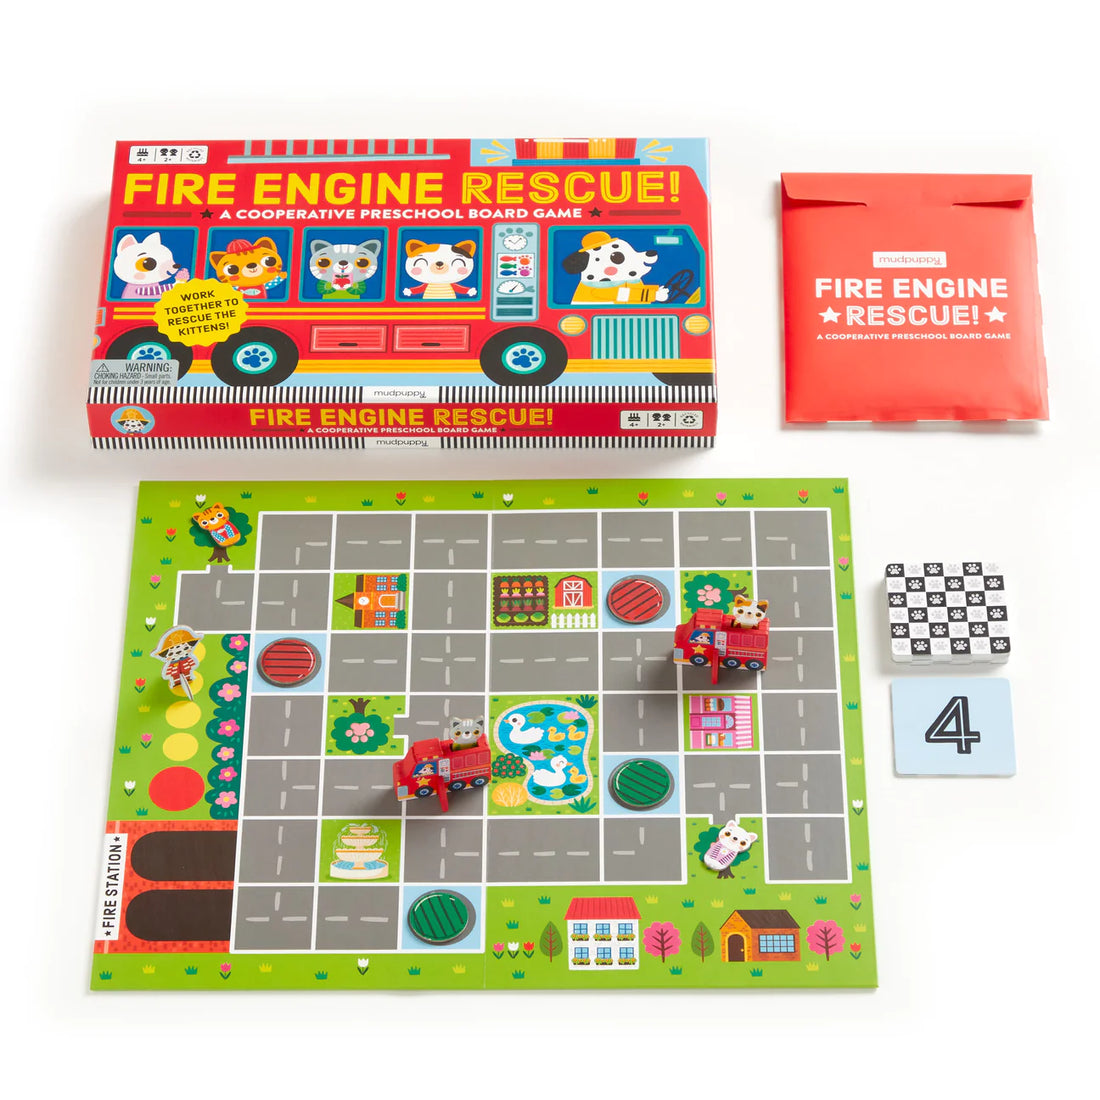 Fire Engine Rescue! Game Preview #2